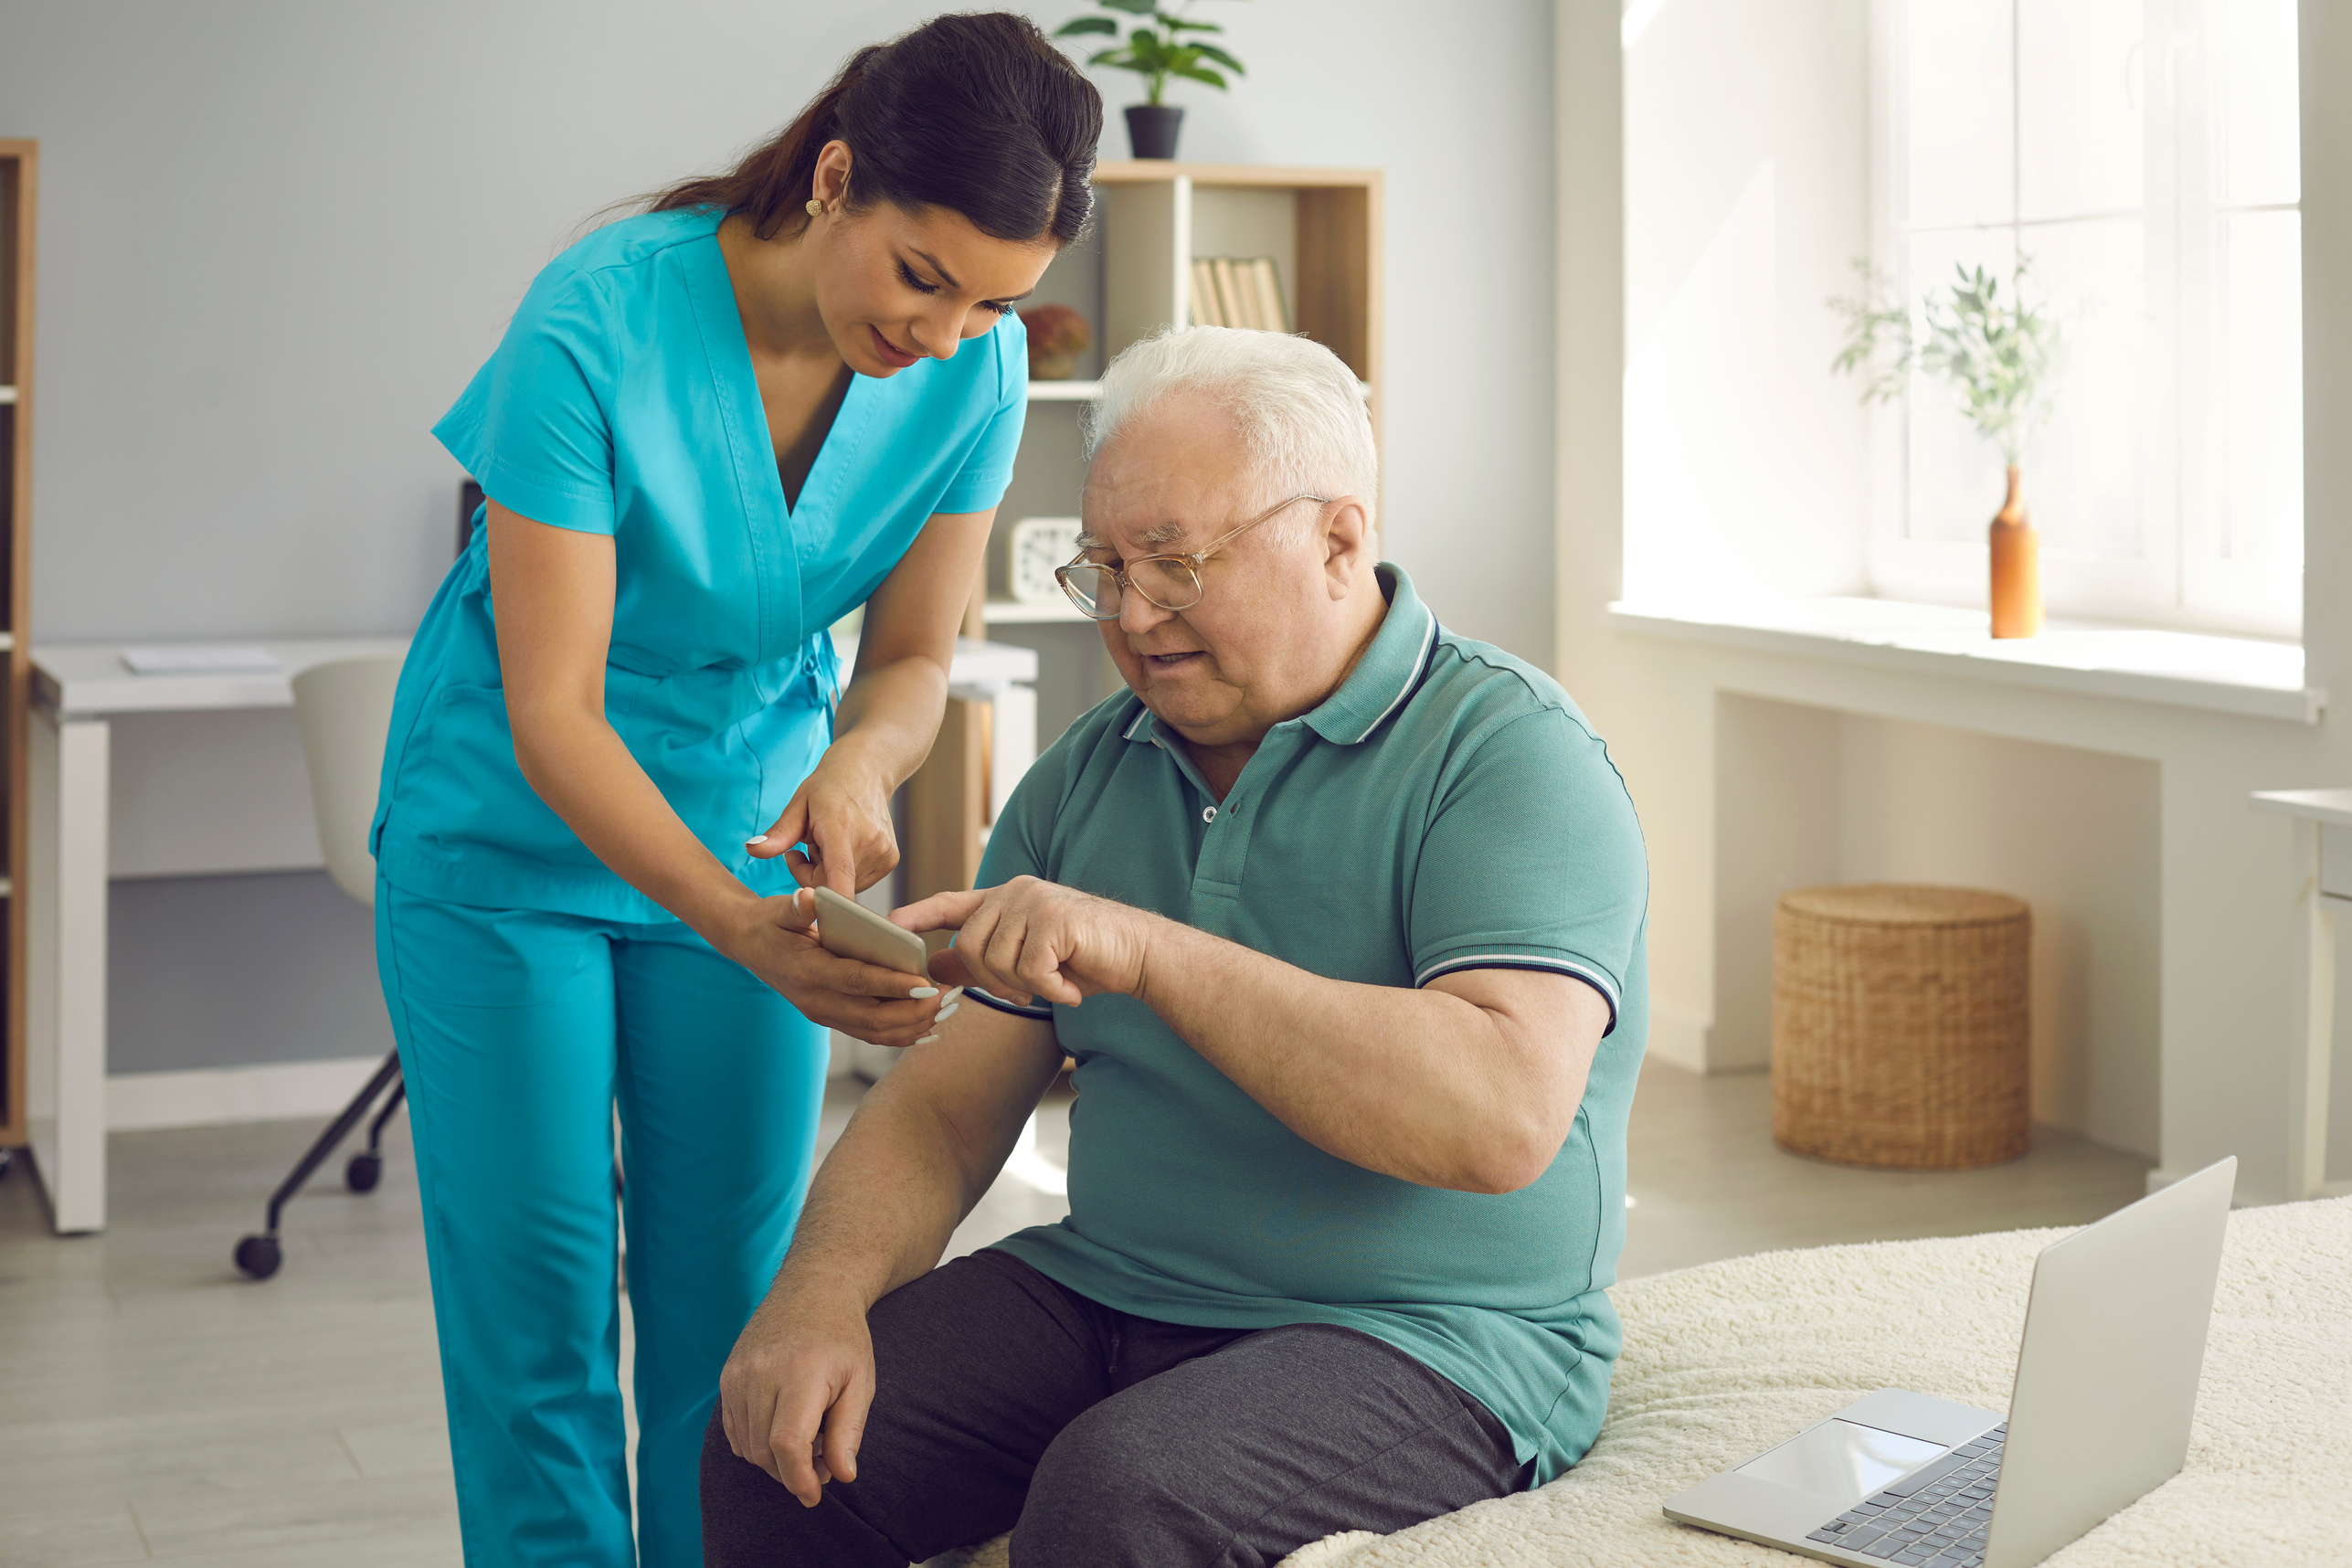 Healthcare Worker Teaching Her Senior Patient to Use Health App on His Mobile Phone